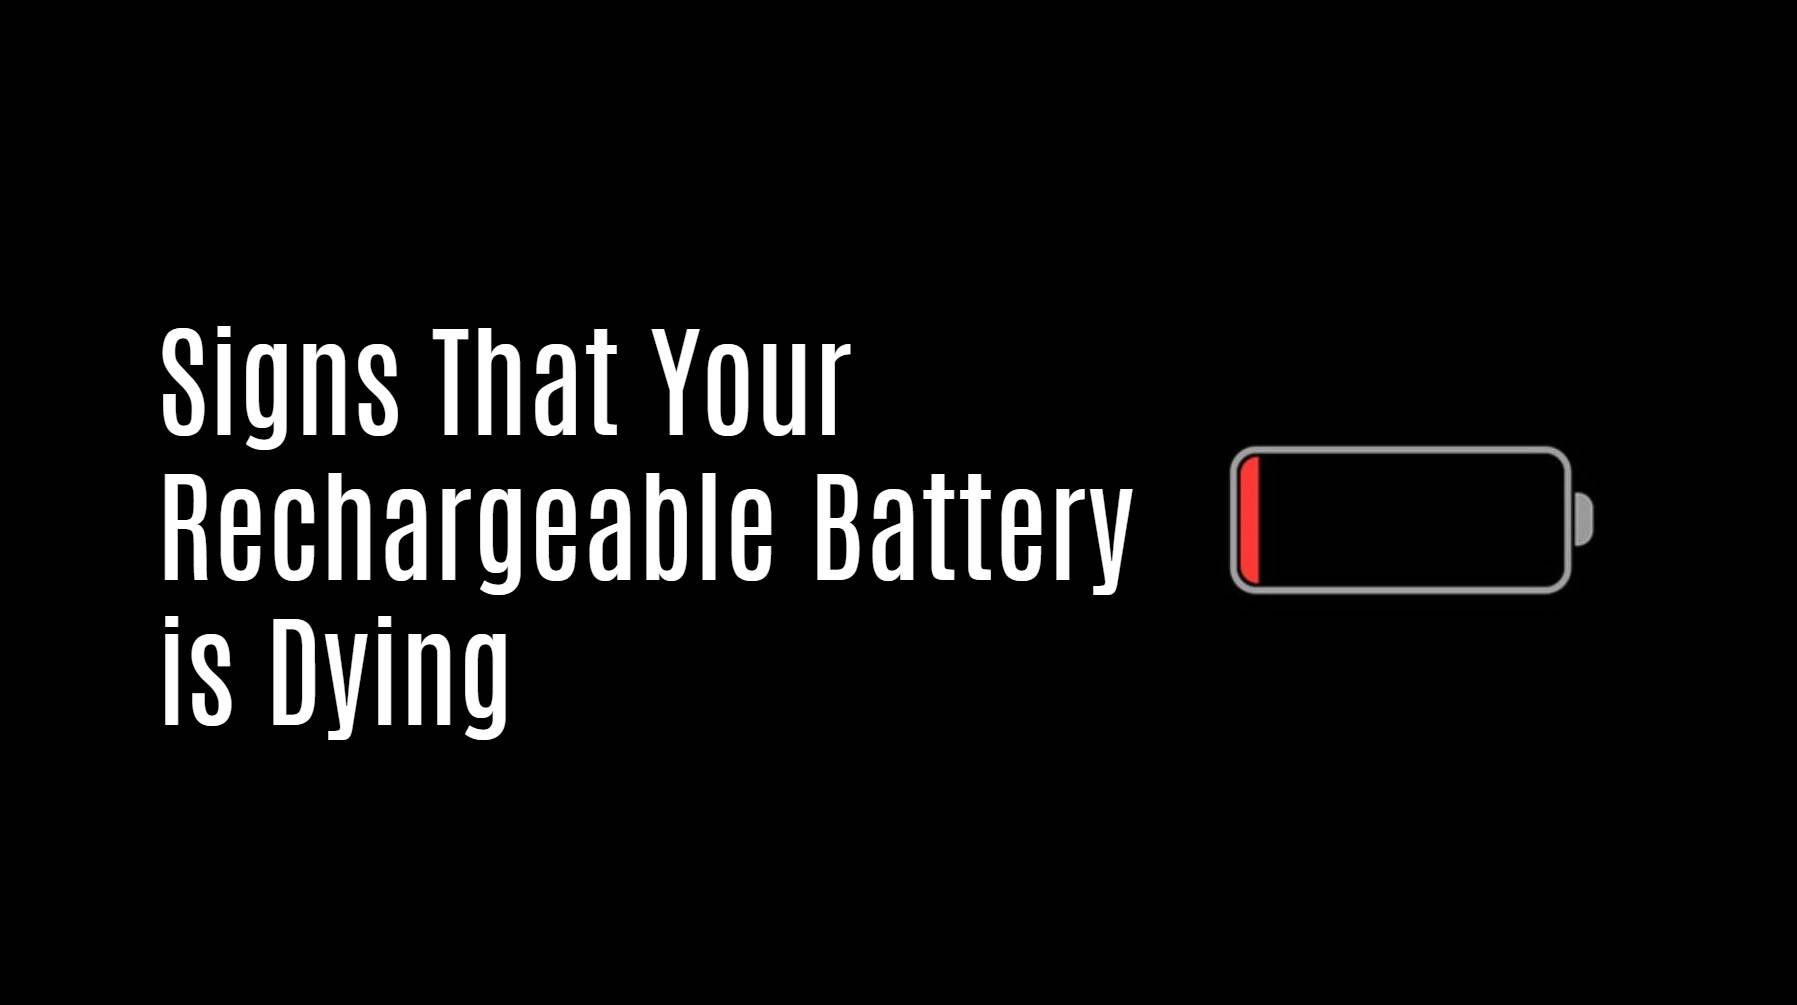 Signs That Your Rechargeable Battery is Dying